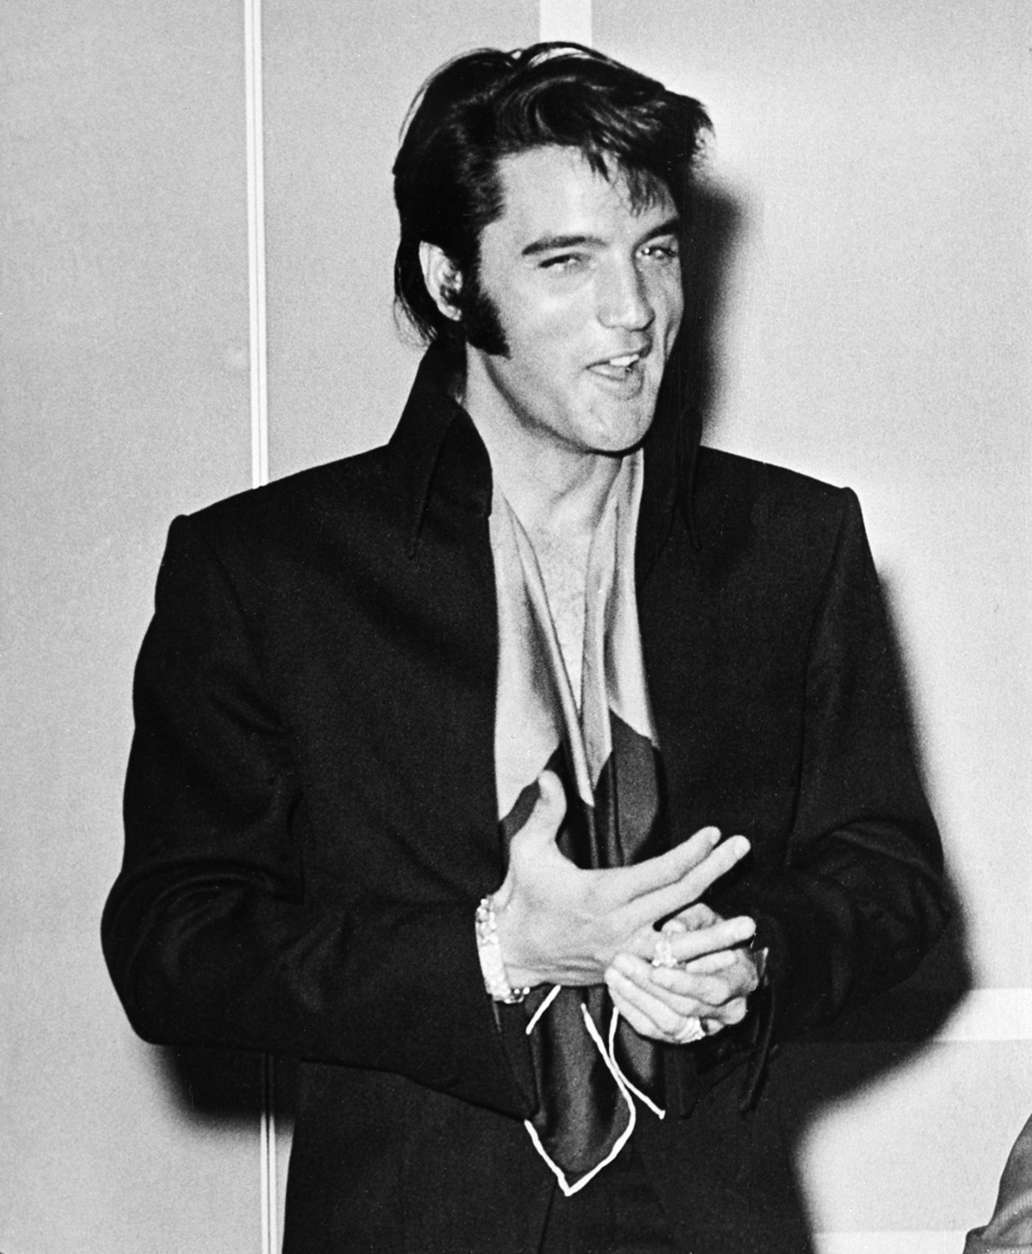 Elvis Presley is shown at the International Hotel where he made his first public stage appearance in 9 years in Las Vegas, Nev., in Aug. 1969.  (AP Photo)